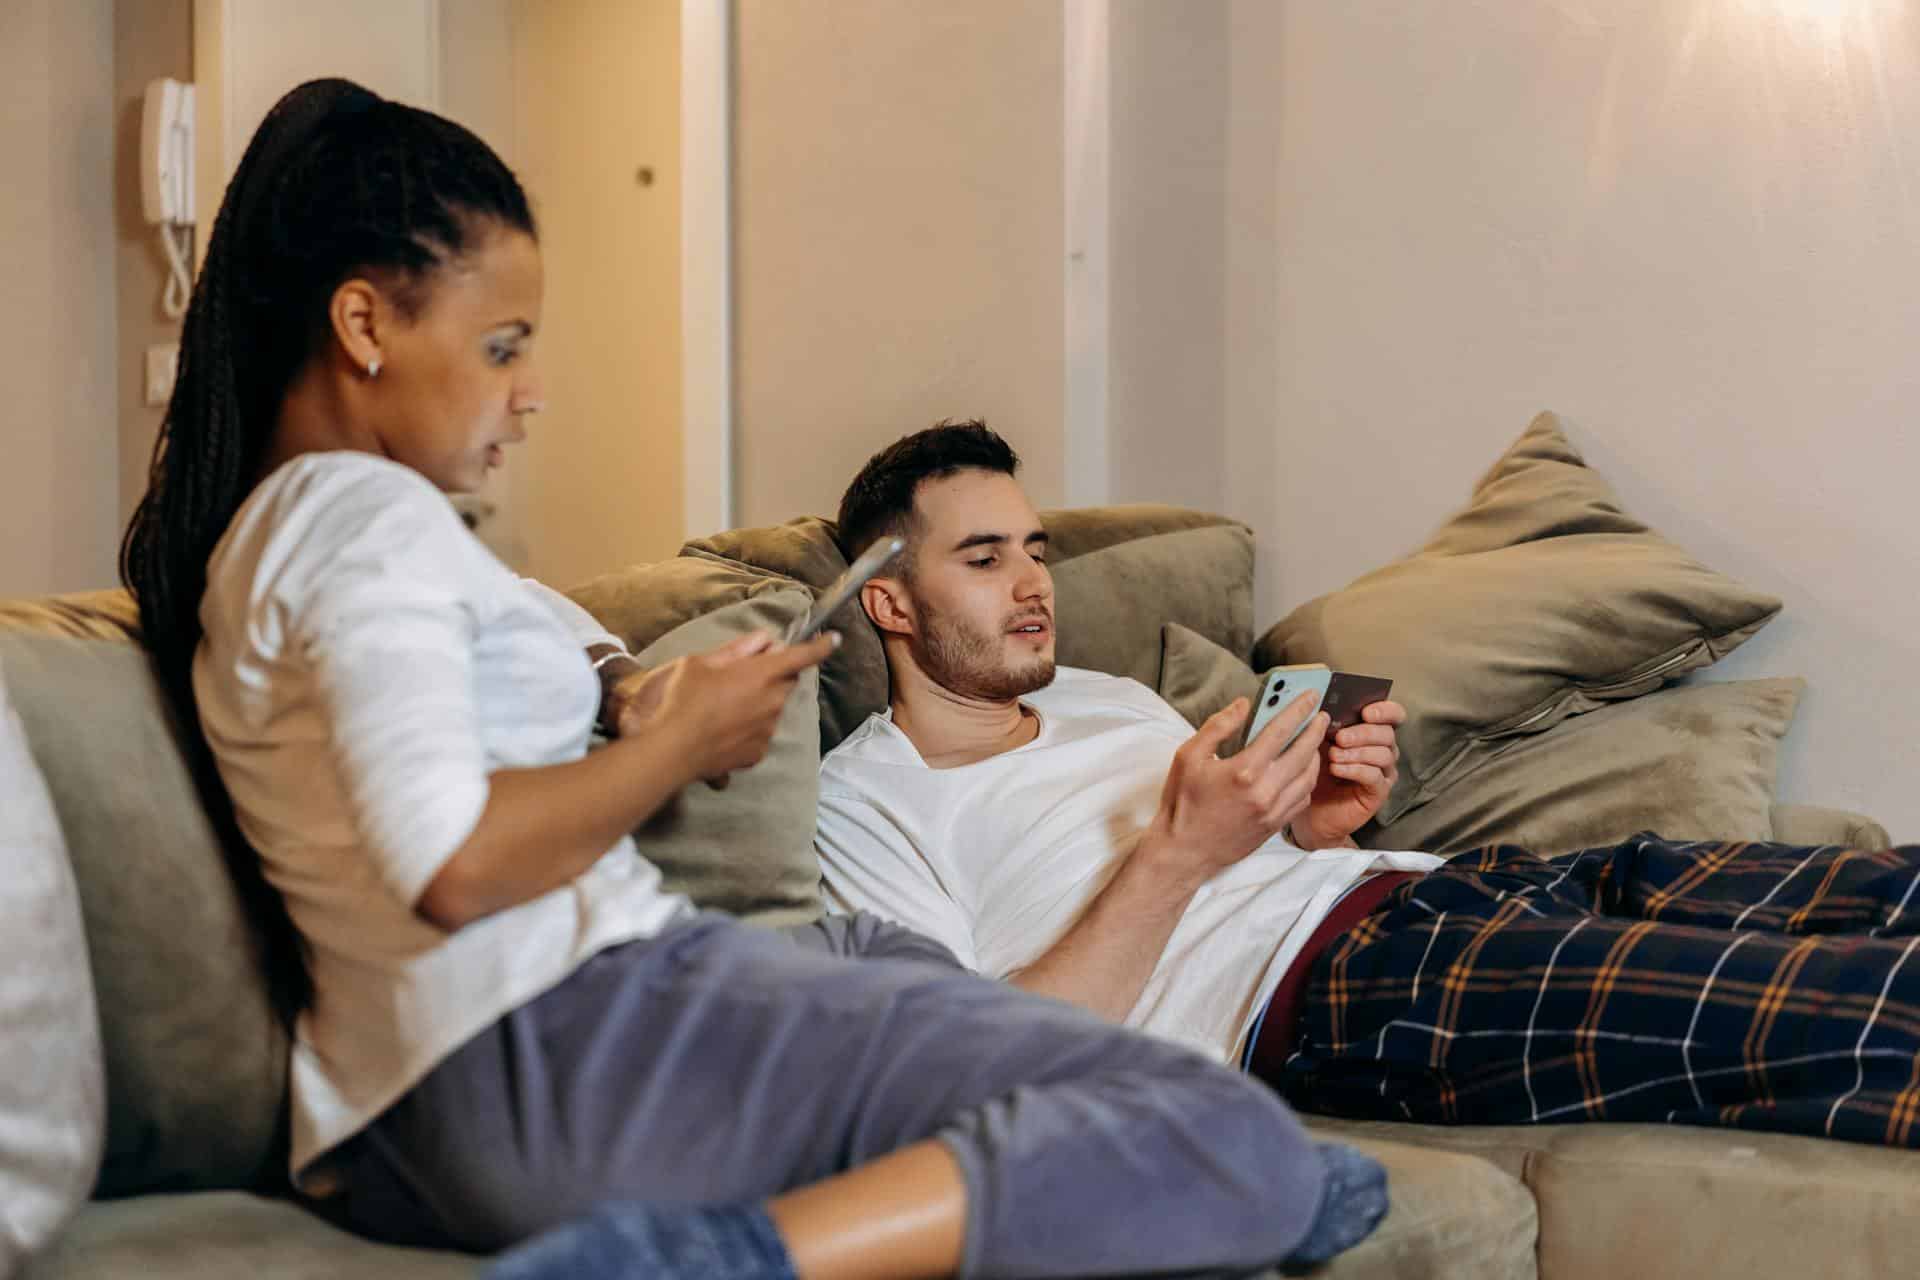 A man and woman sitting on a couch looking at phones.